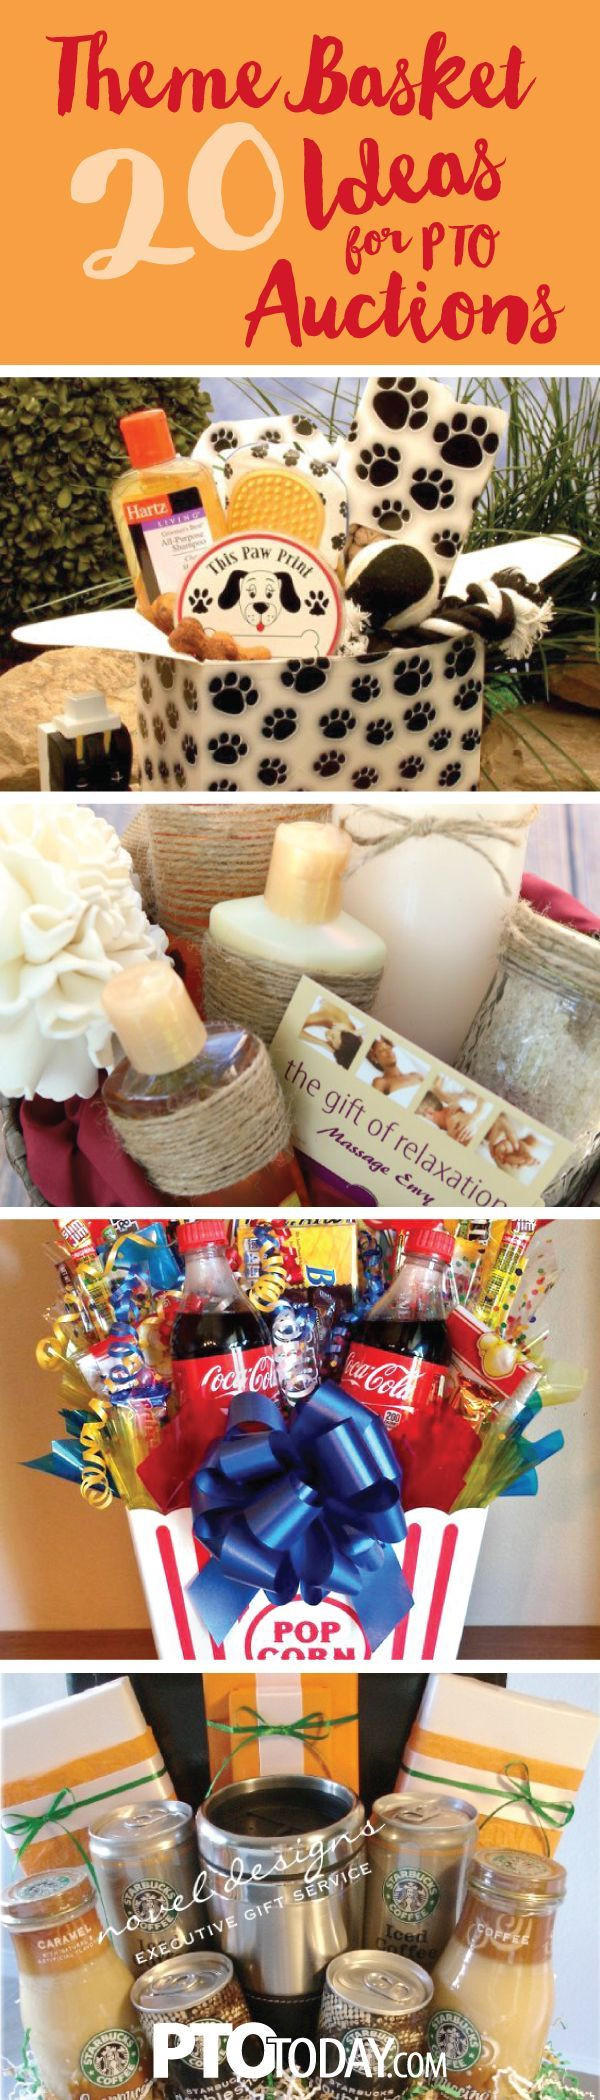 Gift Basket Fundraising Ideas
 484 best images about Fundraising Ideas on Pinterest